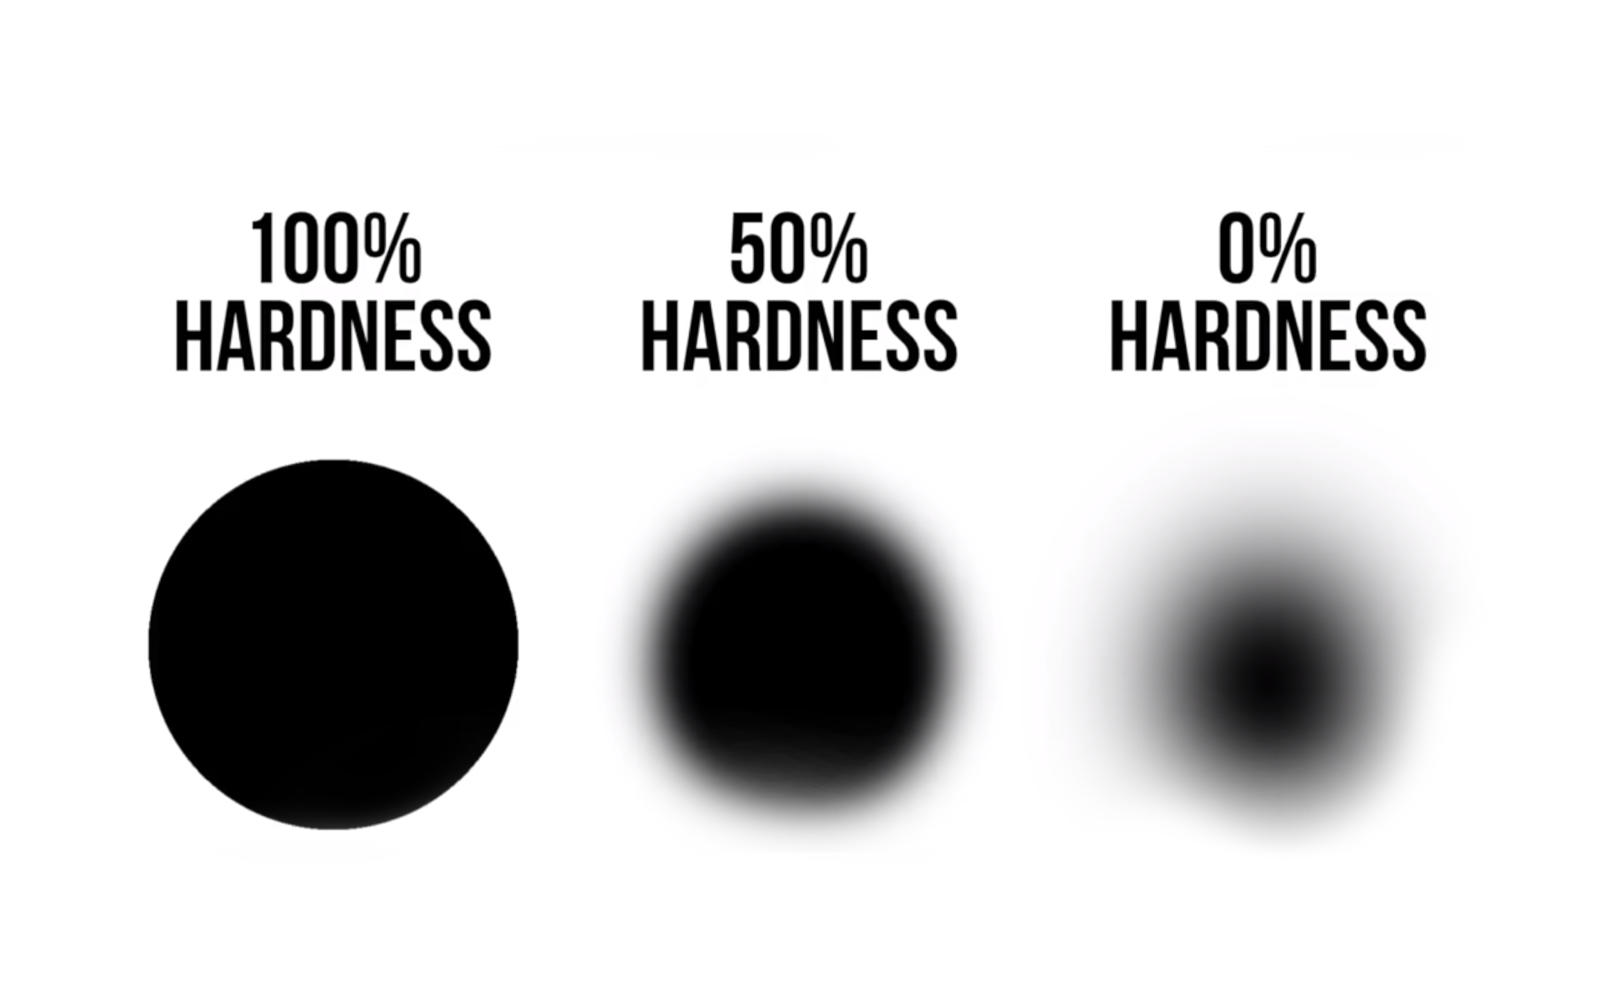 Low hardness for softer brush strokes